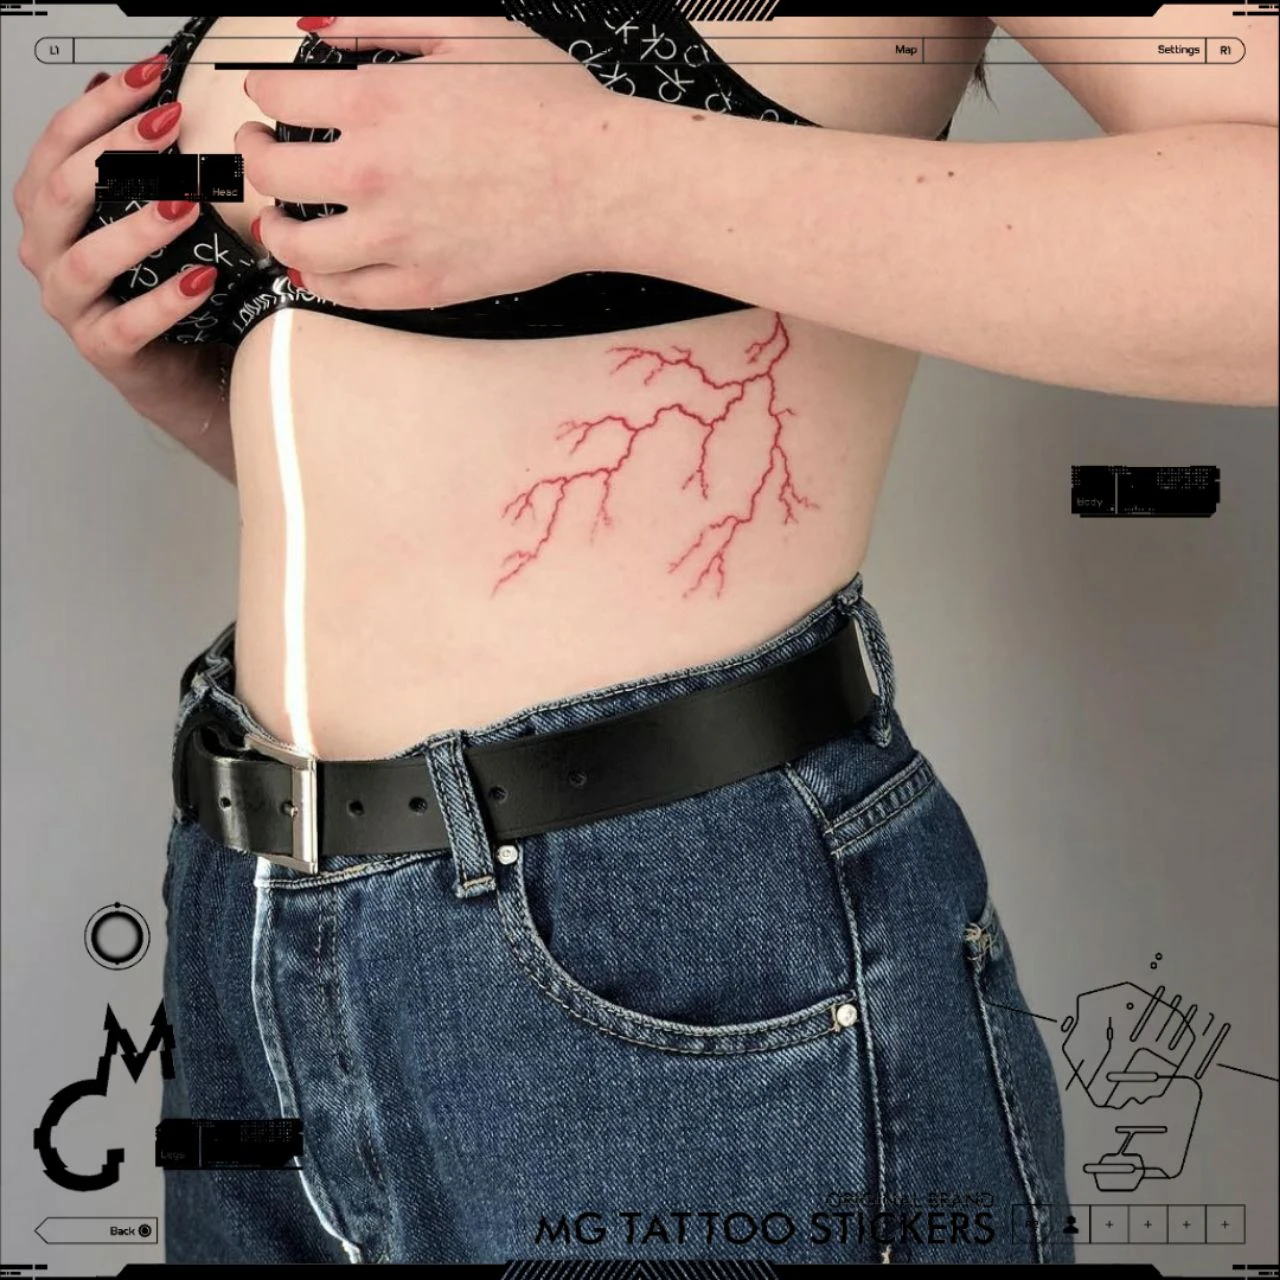 Red Lightning Tattoo Gothic Fake Tattoos for Woman Men Arm Thigh Temporary Tattoos Waterproof Bloodshot Tattoo Stickers